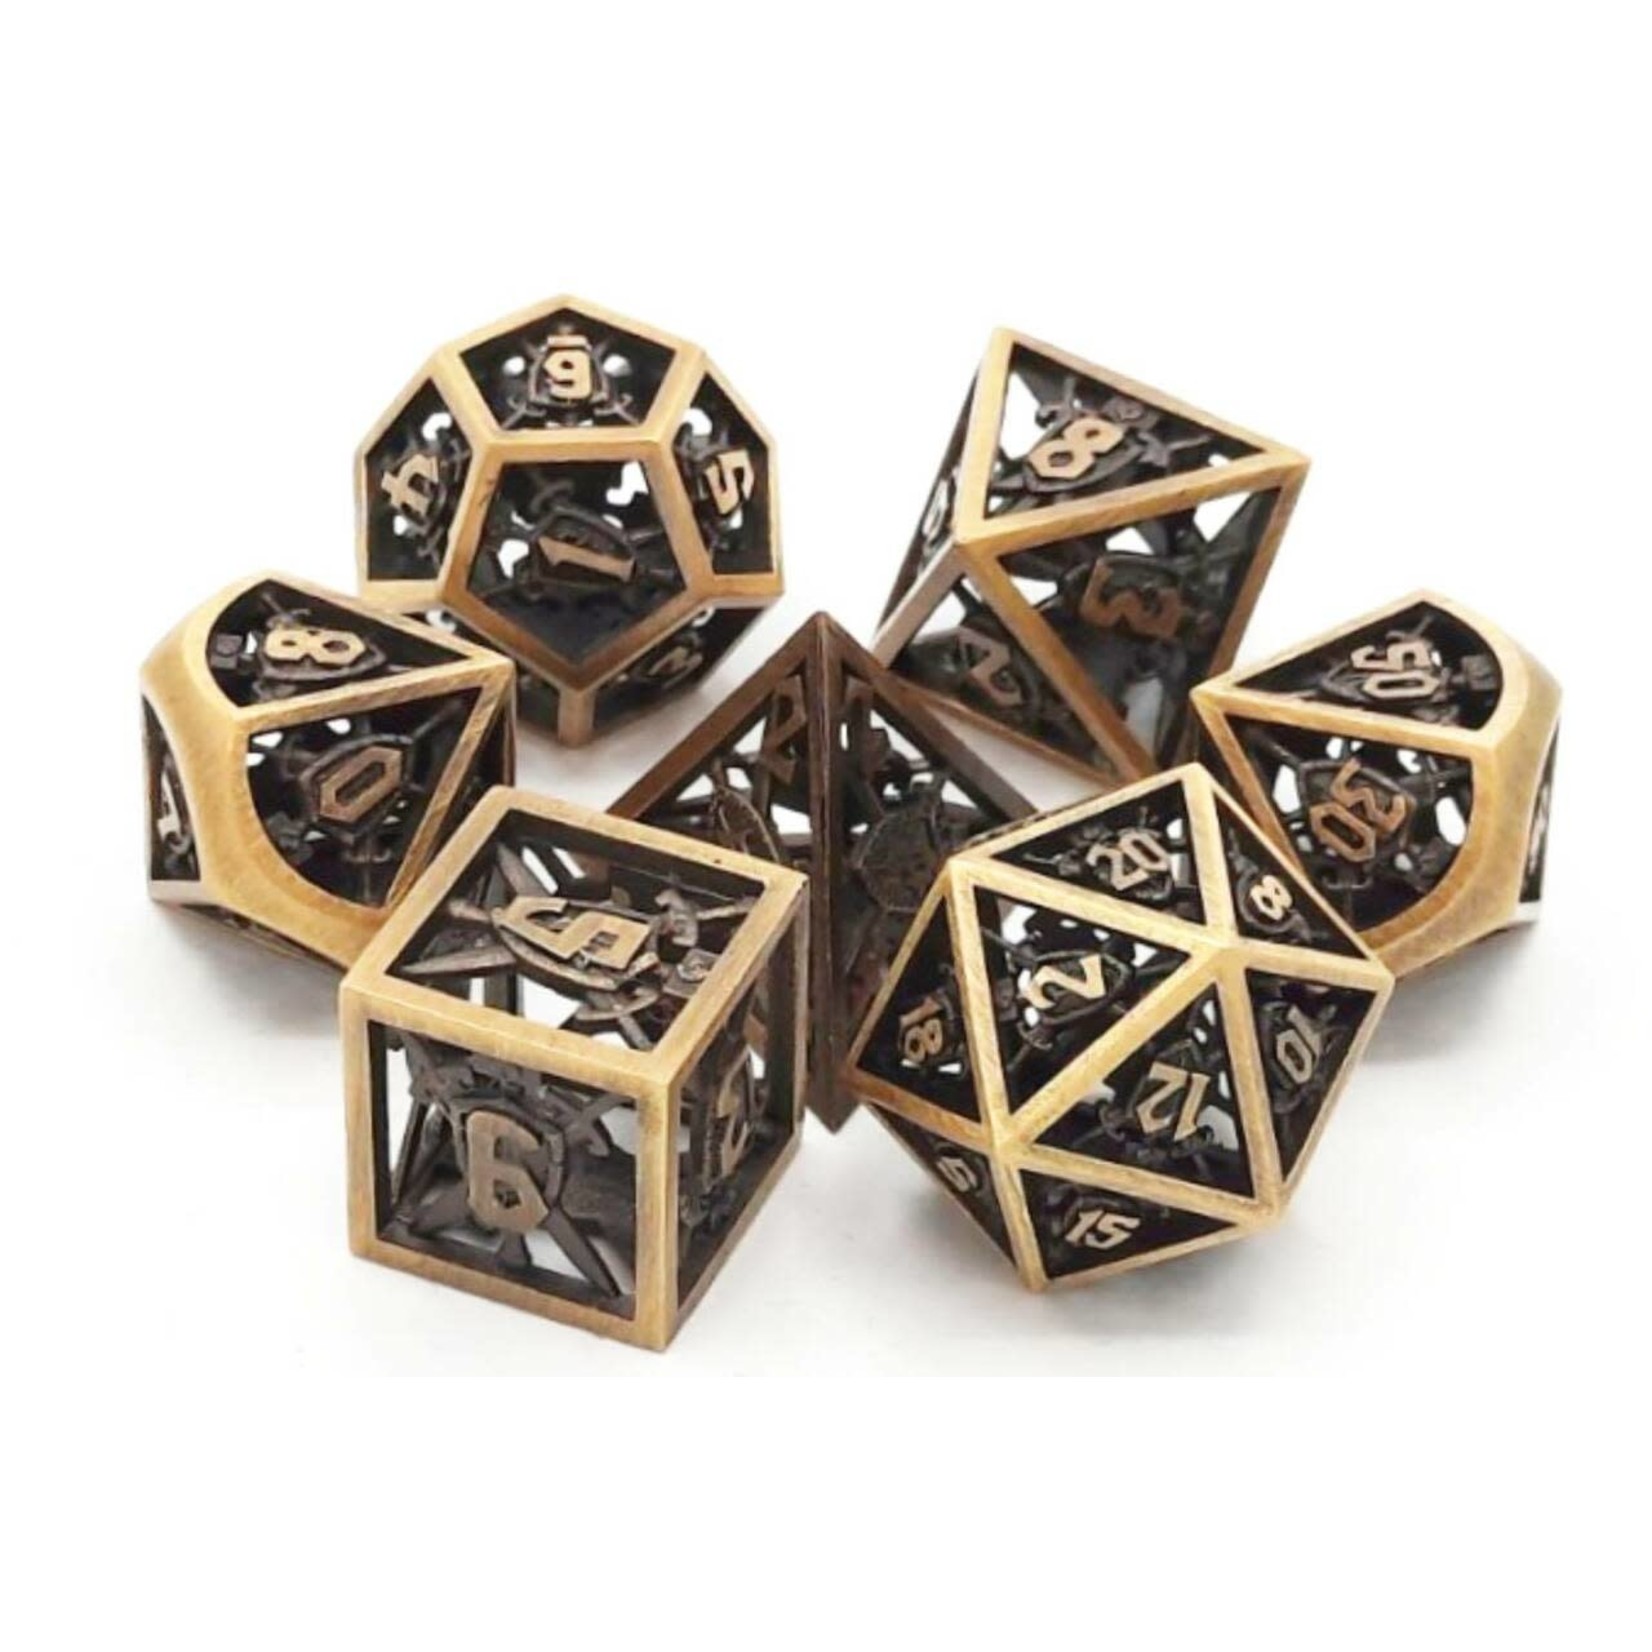 Old School 7 Piece Dice Set: Hollow Sword and Shield Dice - Brushed Gold